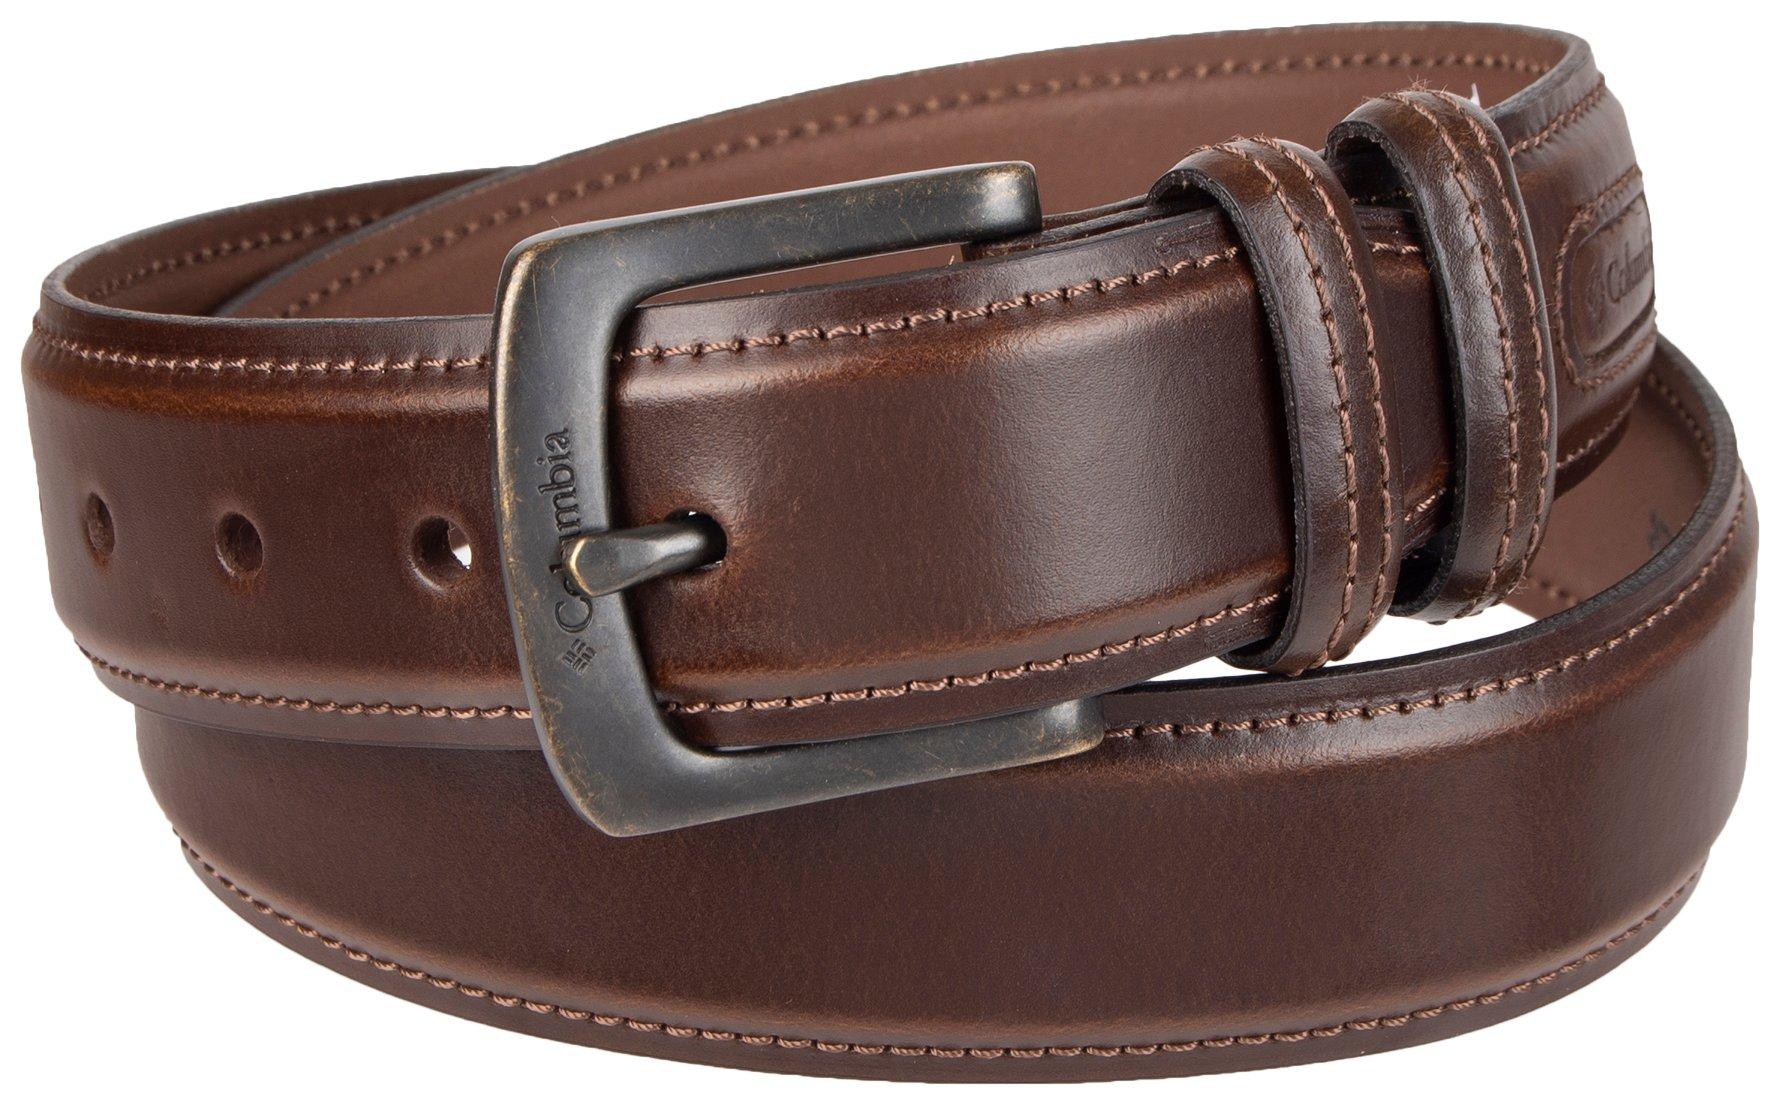 Dockers Mens Solid Braided Leather Belt